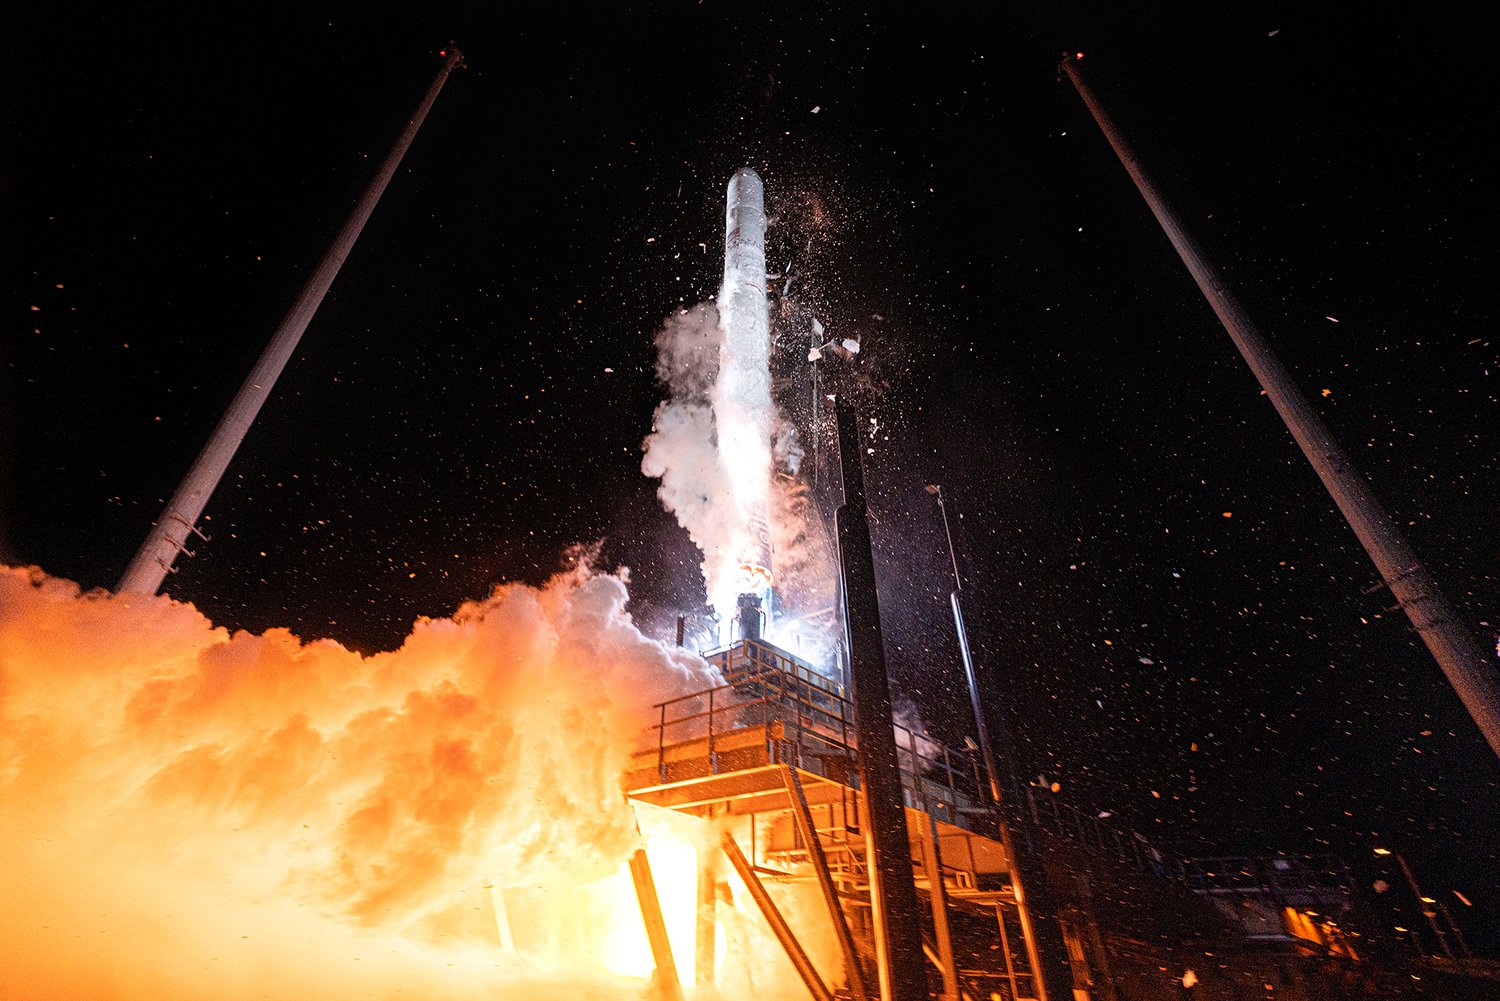 Relativity's 3D-printed rocket during launch